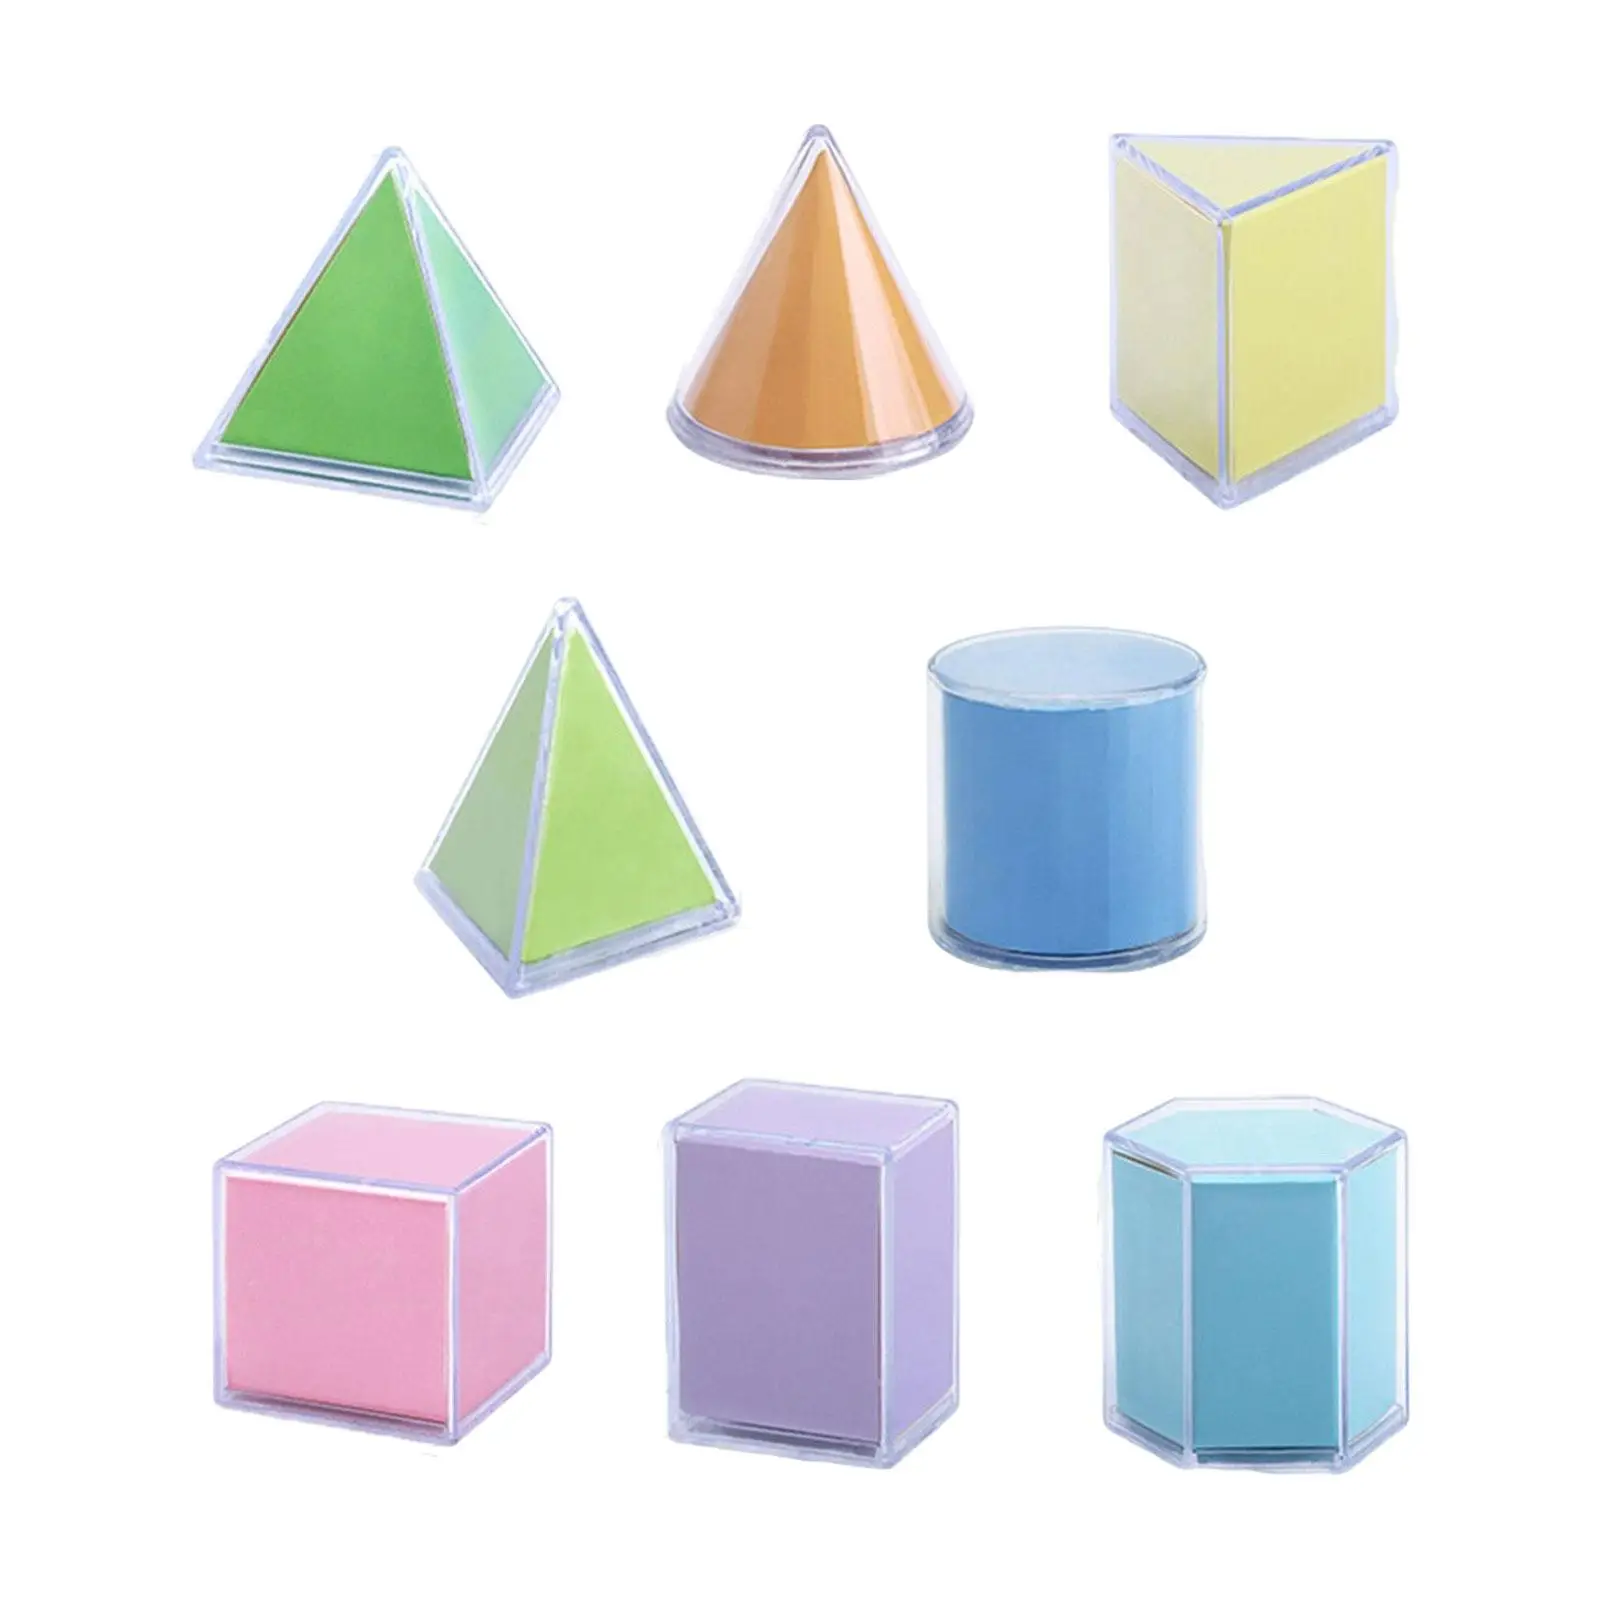 8 Pieces 3D Shapes Geometric Montessori Toys Stacking Game Shape Sorter Sorting Toy for Toddler